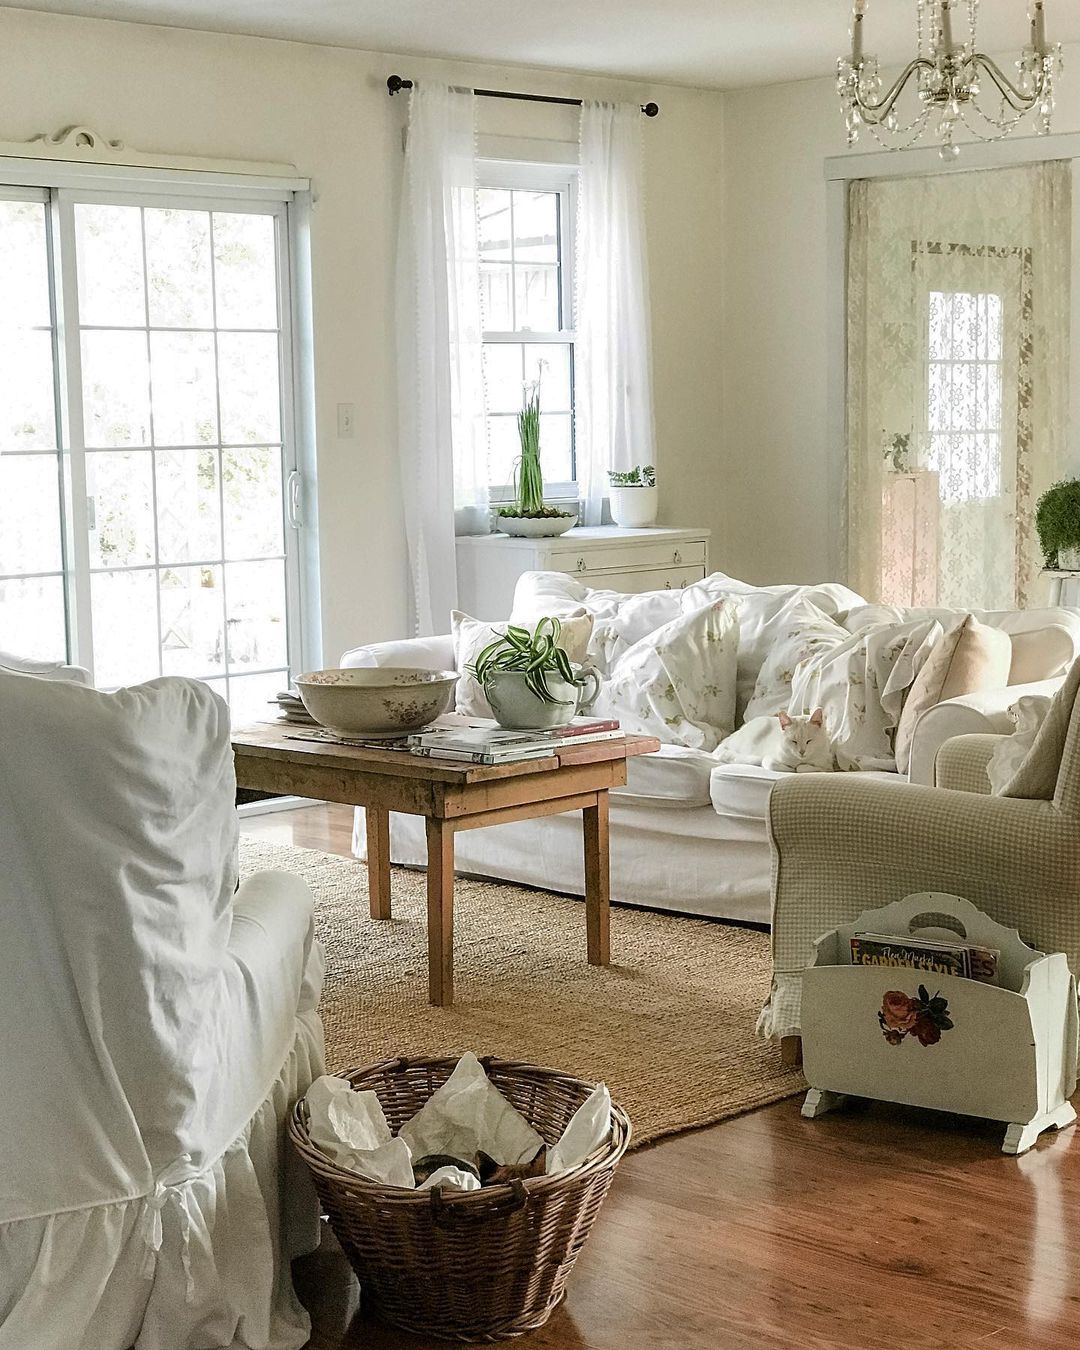 Cottagecore Style Home with White Cat Lying on White Couch. Photo by Instagram user @tracey_hiebert